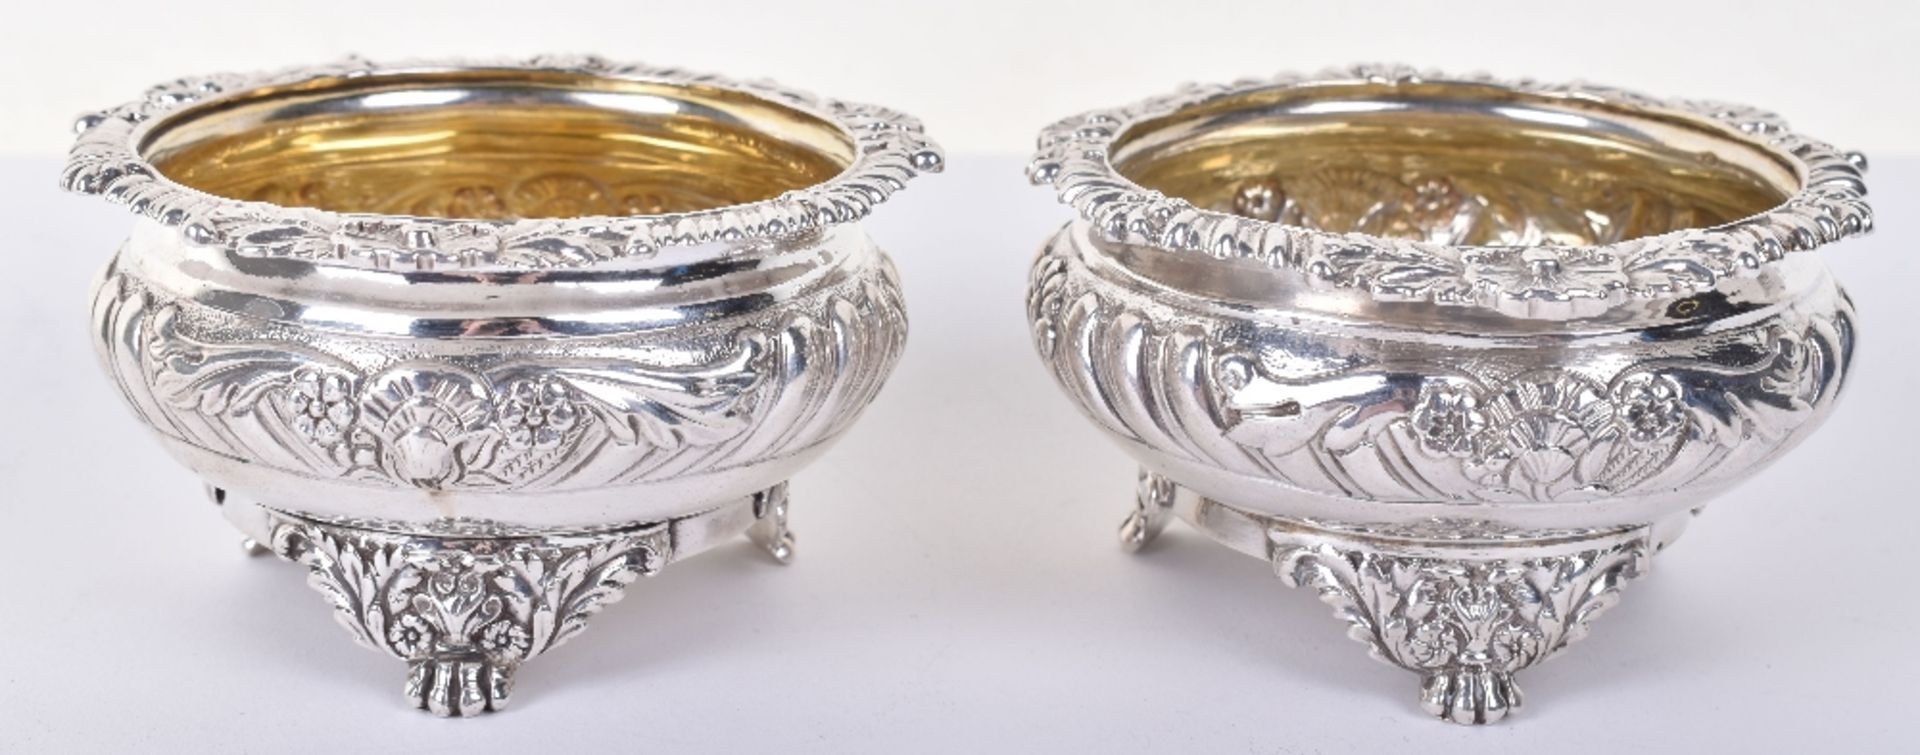 A matched pair of Georgian silver salt cellars, by Paul Storr, London 1817/1826 - Image 4 of 9